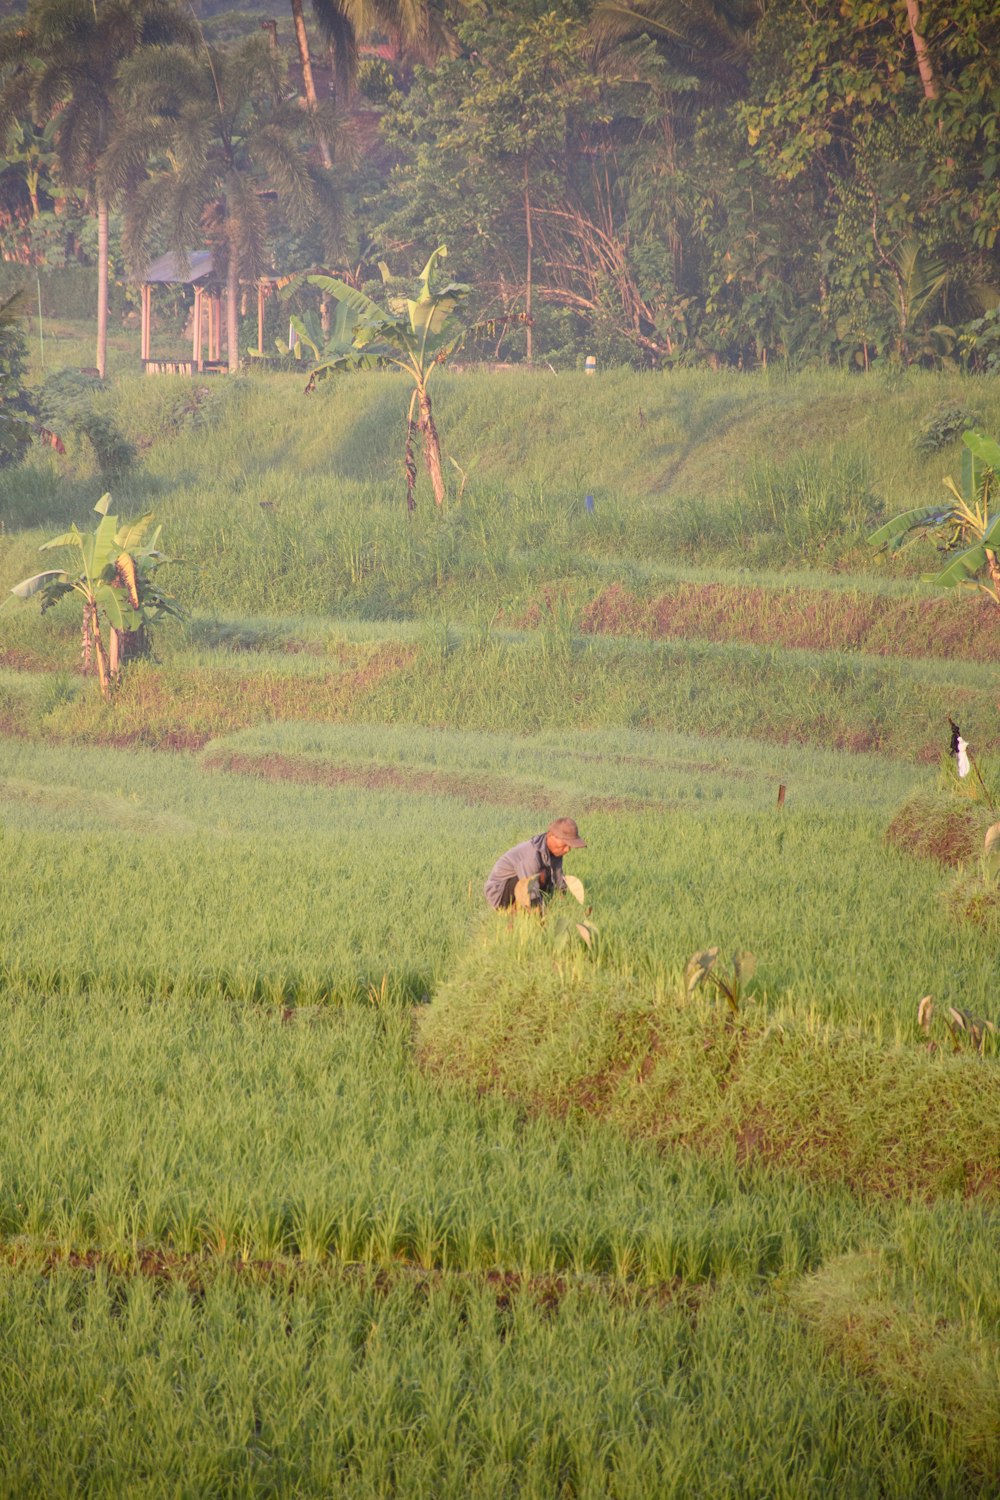 a man is working in a field of grass